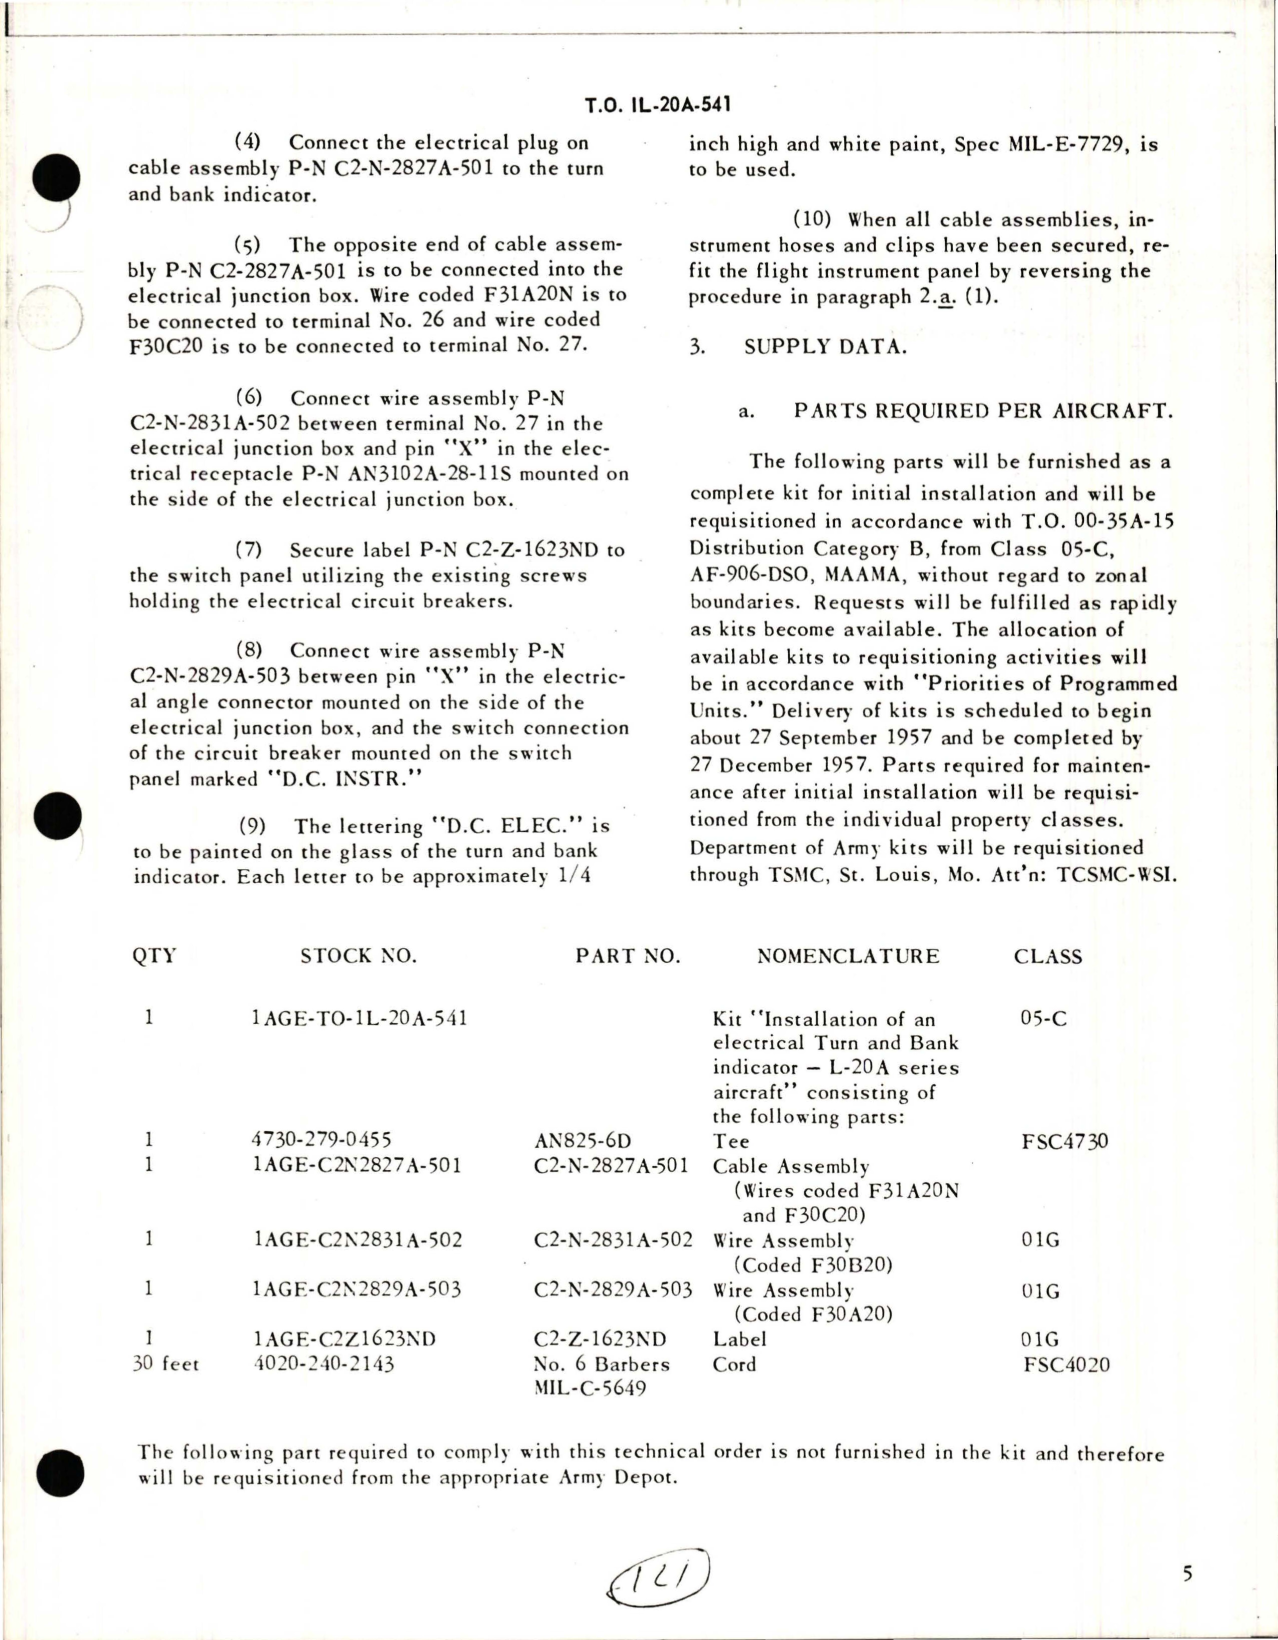 Sample page 5 from AirCorps Library document: Installation of Electrical Turn and Bank Indicator - L-20A Series